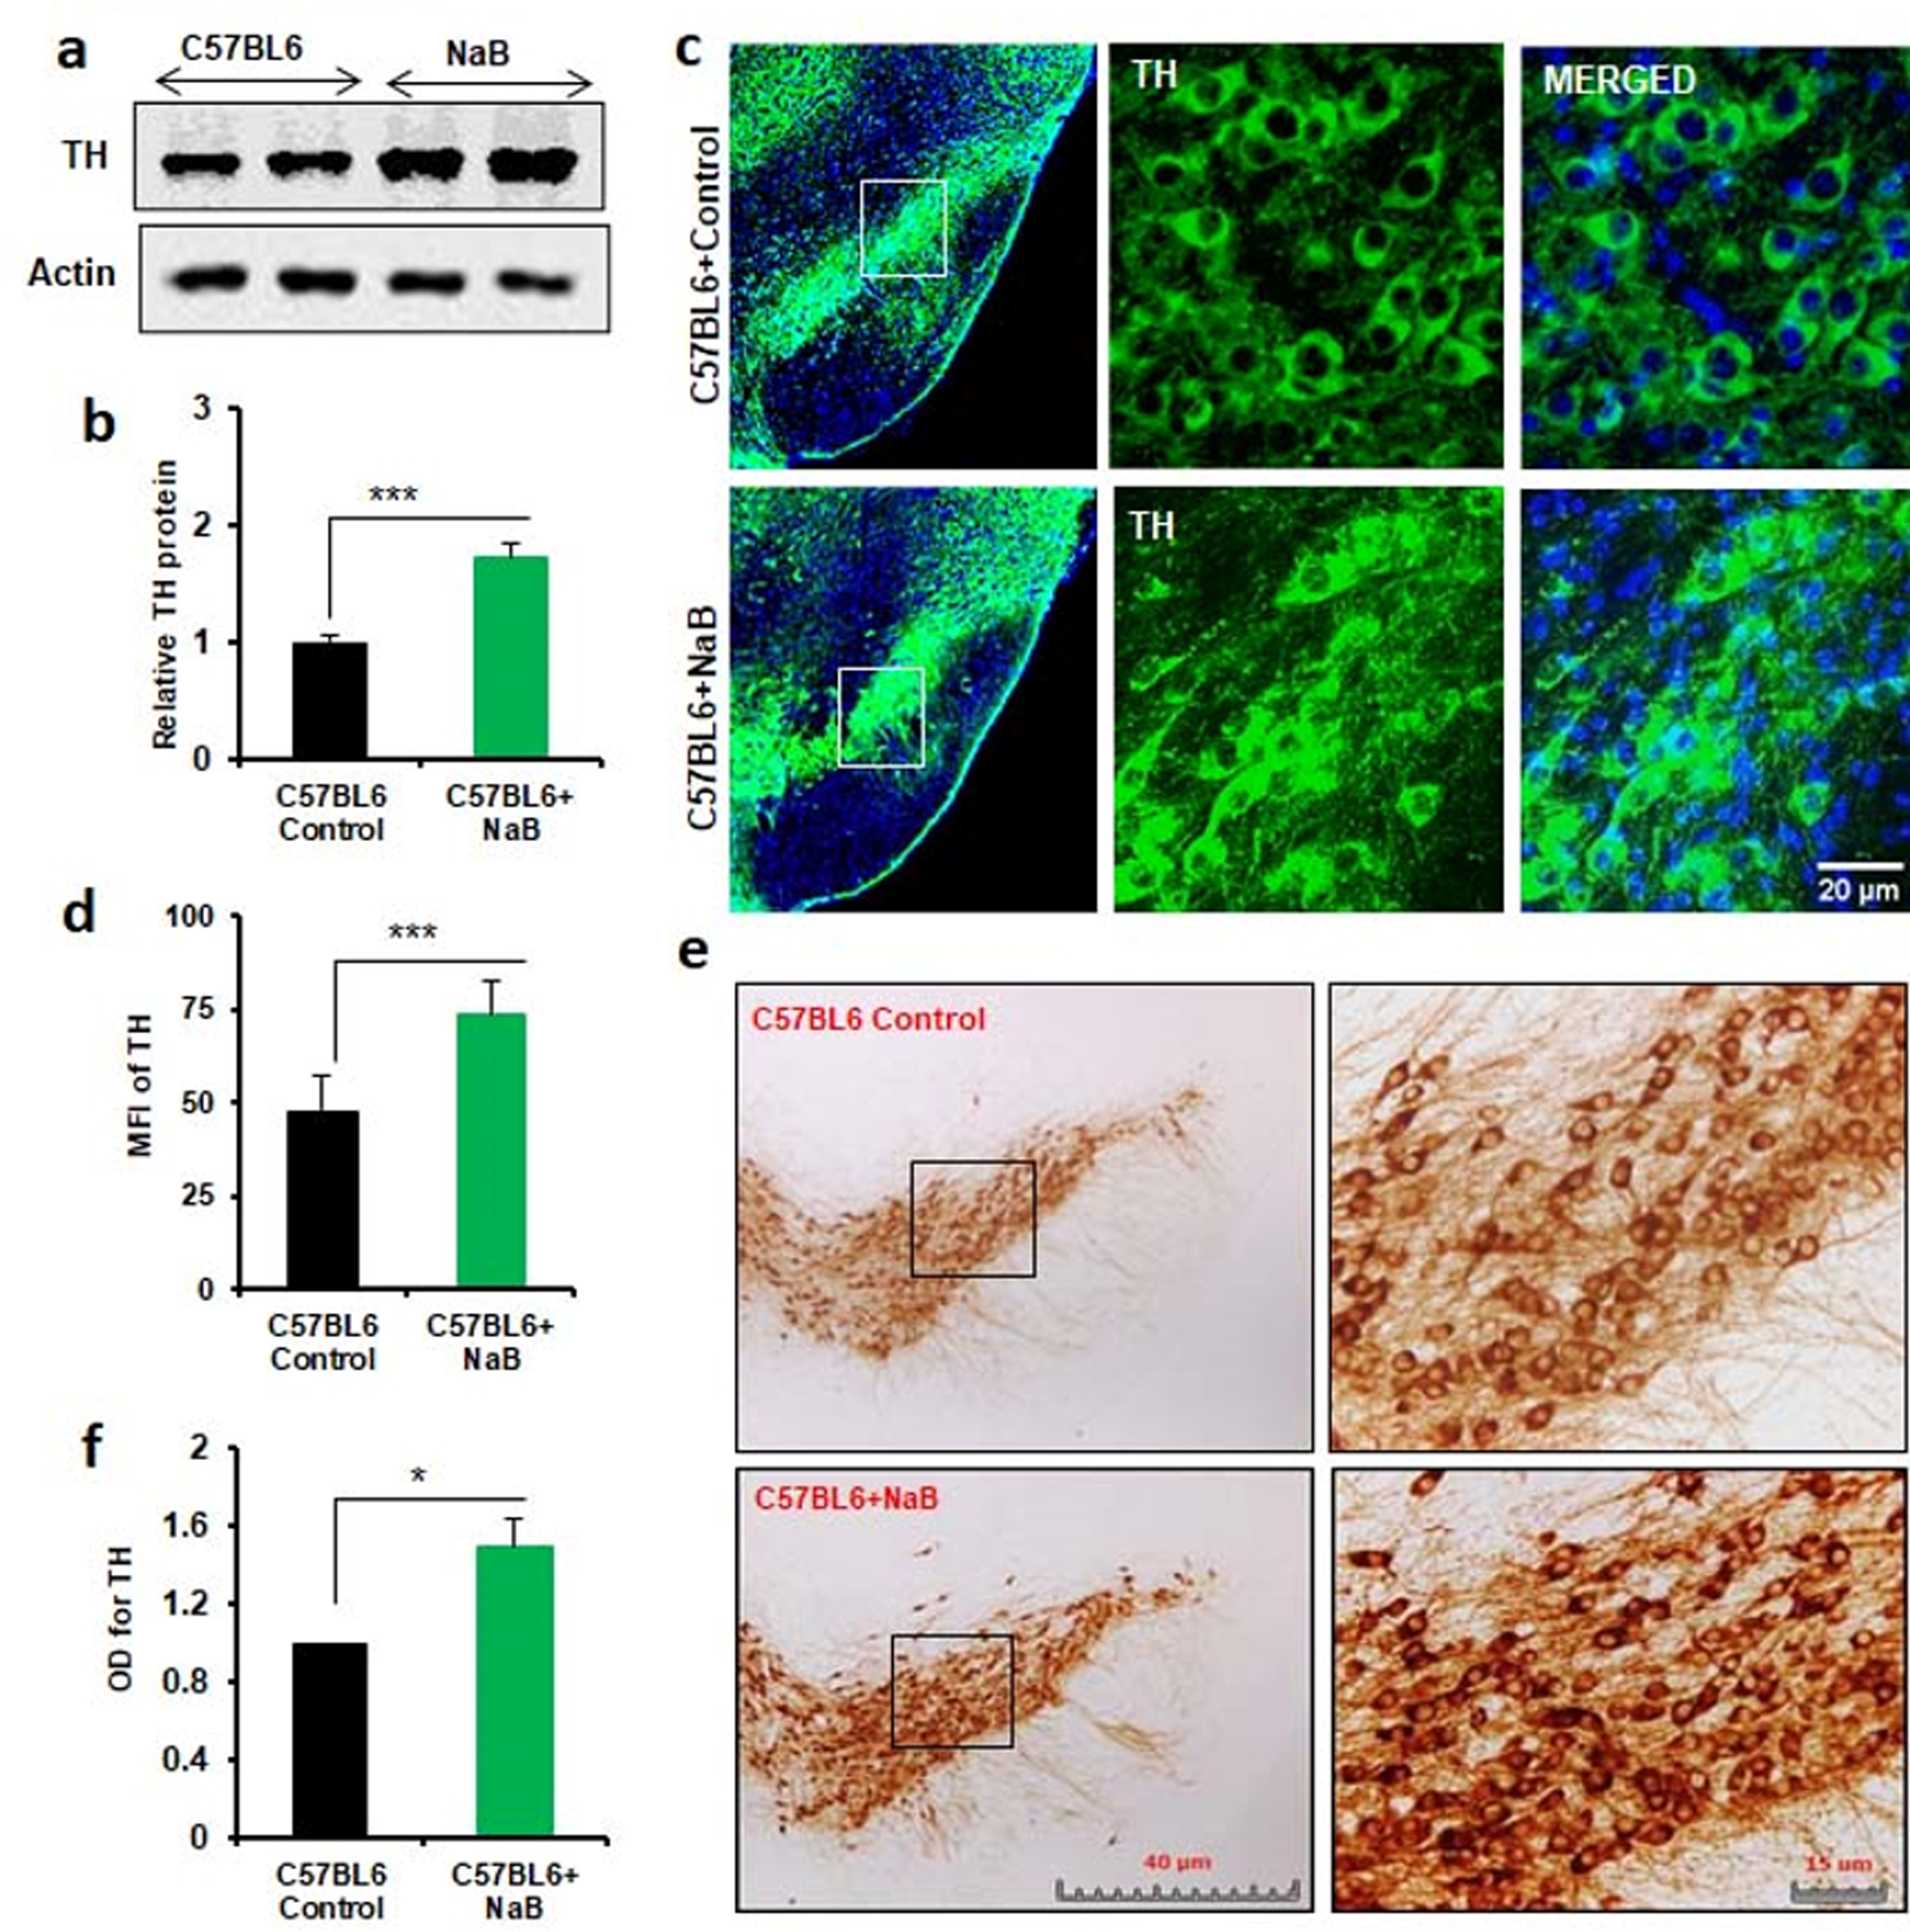 Oral treatment with NaB increases the level of TH in vivo in the nigra of normal C57/BL6 mice. Male C57/BL6 mice (n = 5 per group) were treated with NaB (50 mg/kg body wt/d) mixed in 0.5% methylcellulose orally via gavage. Control mice received 0.5% methylcellulose as vehicle. After 30 d of treatment, the level of TH was monitored in the SNpc by Western blot (A). Actin was run as loading control. Bands were scanned and values (TH/actin) presented as relative to control (B). Results are mean±SEM of five mice per group. ***p < 0.001 vs control by two-tailed paired t-tests. The level of TH was monitored in ventral midbrain sections by immunofluorescence (C). MFI of TH (D) was calculated in two nigral sections of each of five mice per group. Results are mean±SEM of five mice per group. ***p < 0.001 vs control by two-tailed paired t-tests. The level of TH was monitored in ventral midbrain sections by DAB immunostaining (E). Optical density of TH (F) was calculated in two nigral sections of each of five mice per group. Results are mean±SEM of five mice per group. *p < 0.05 vs control by two-tailed paired t-tests.